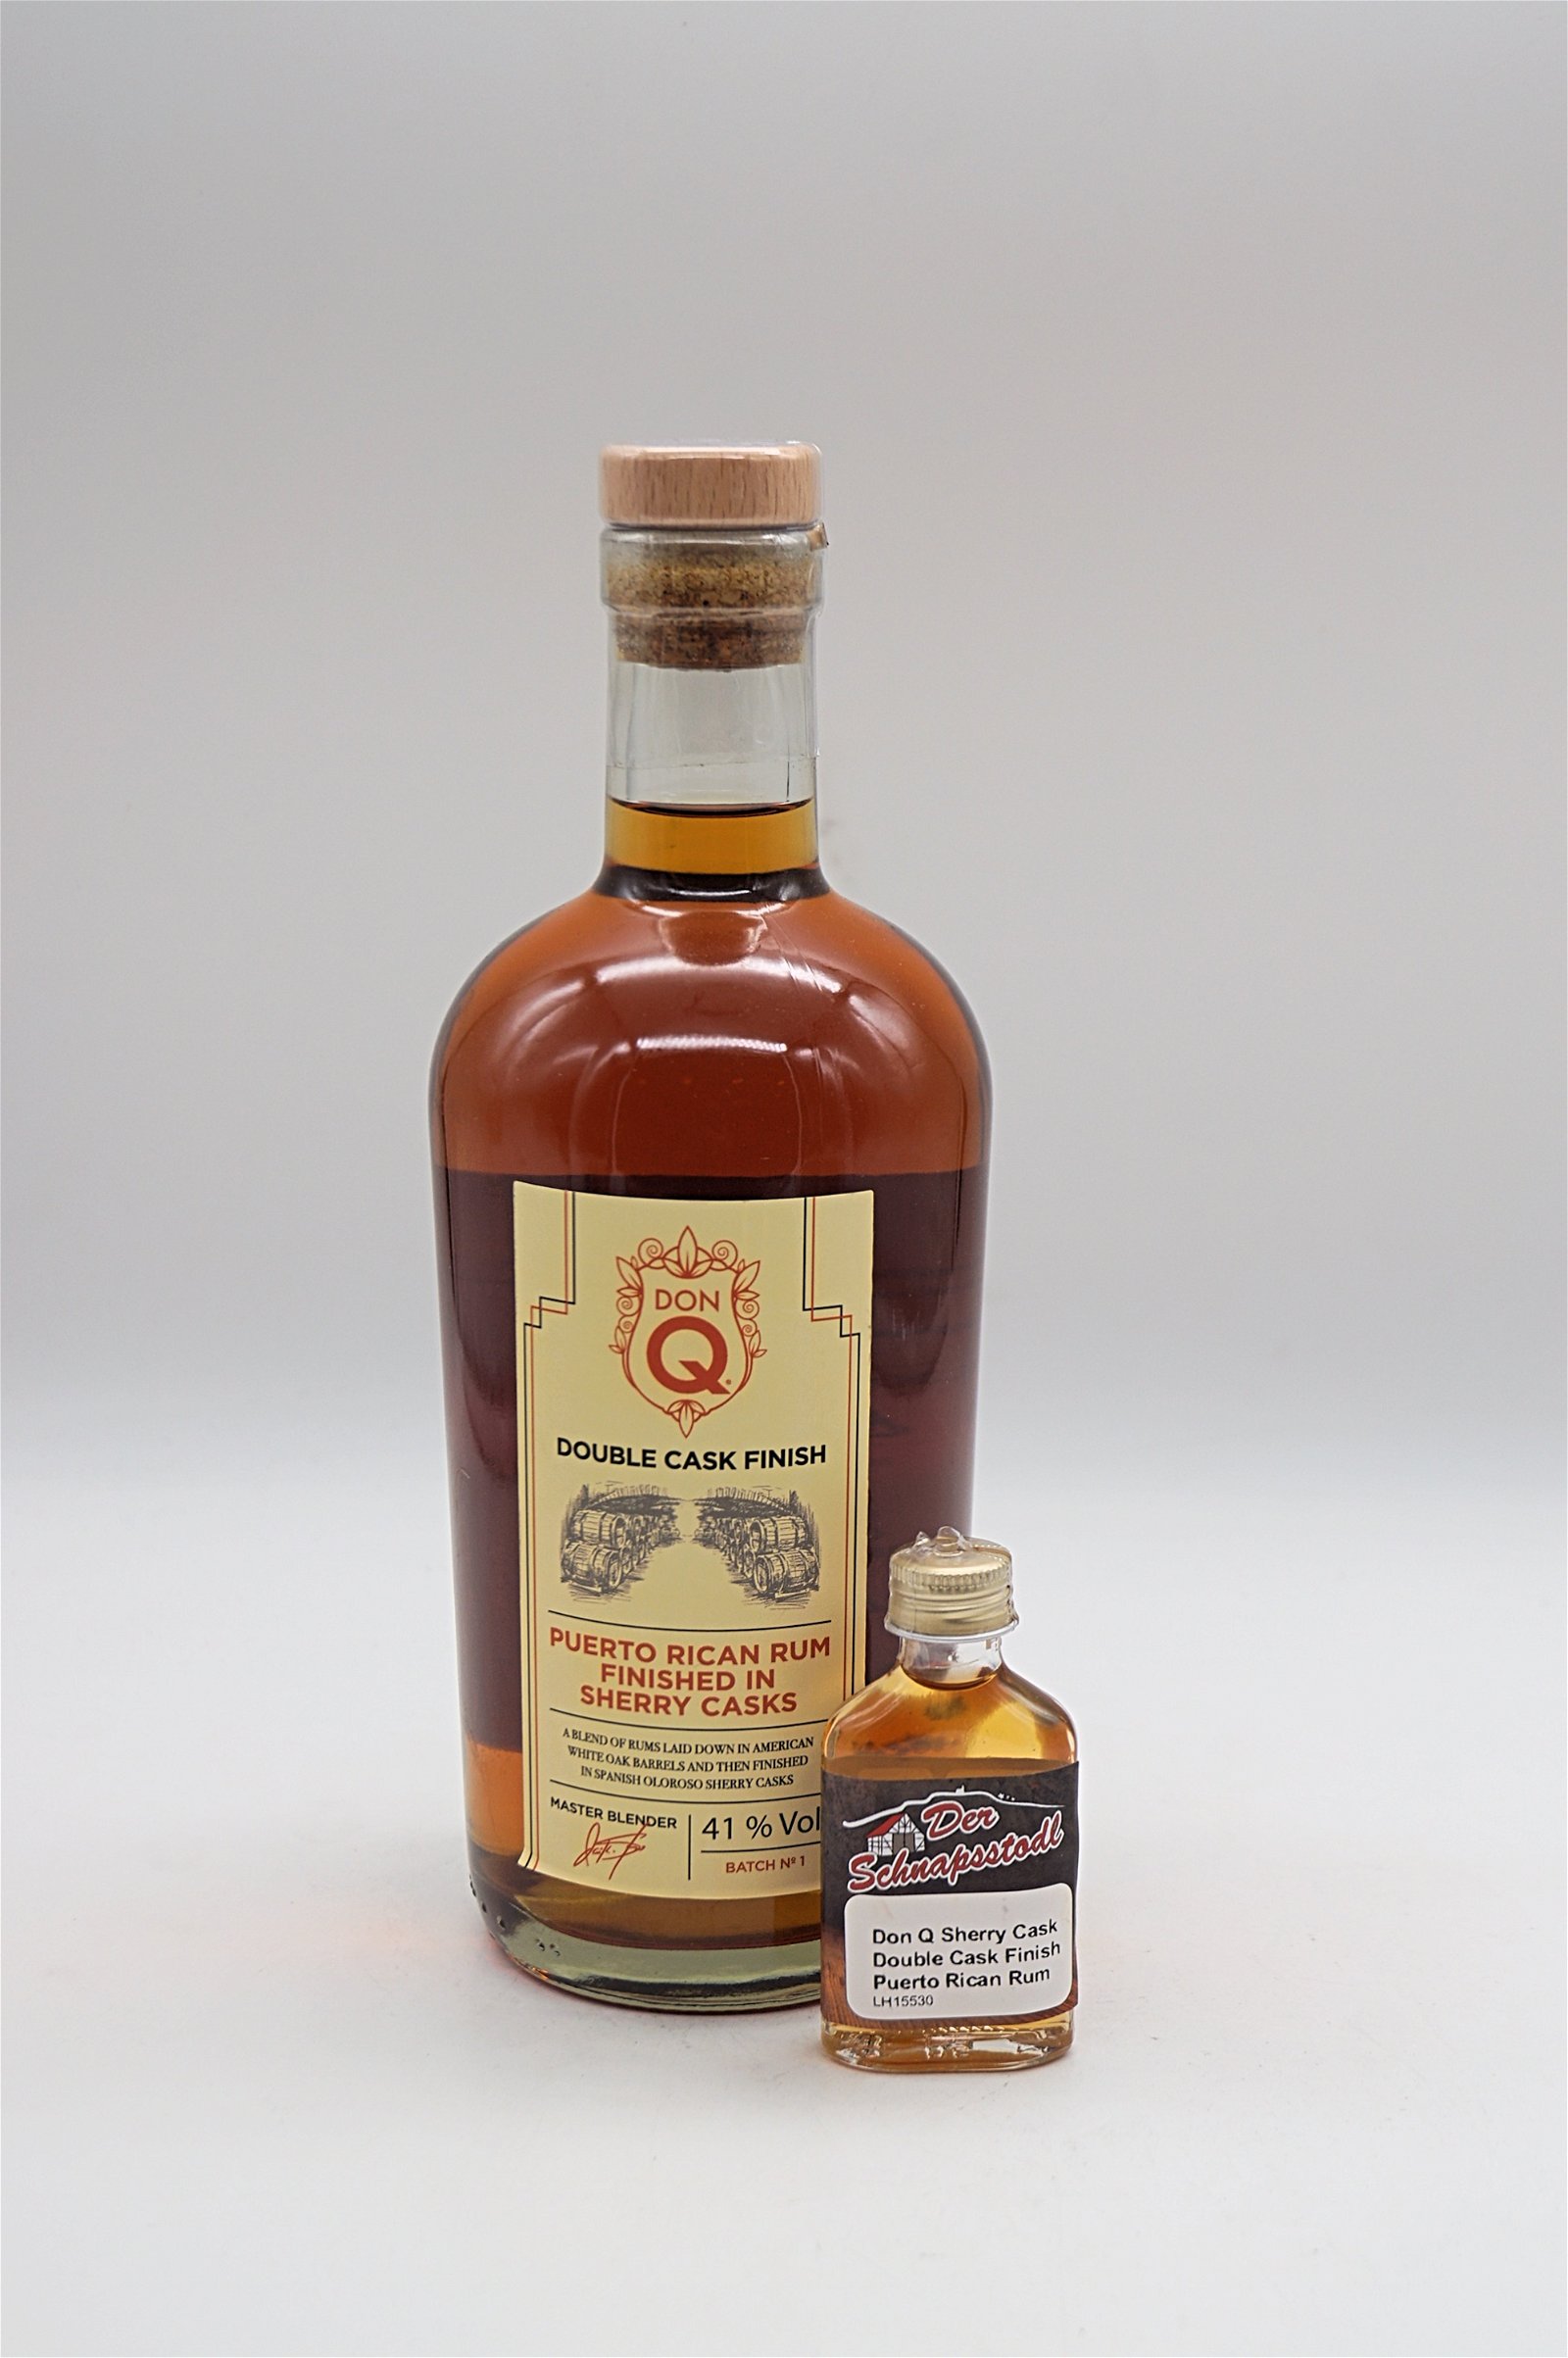 Don Q Sherry Cask Double Cask Finish Puerto Rican Rum Sample 20 ml